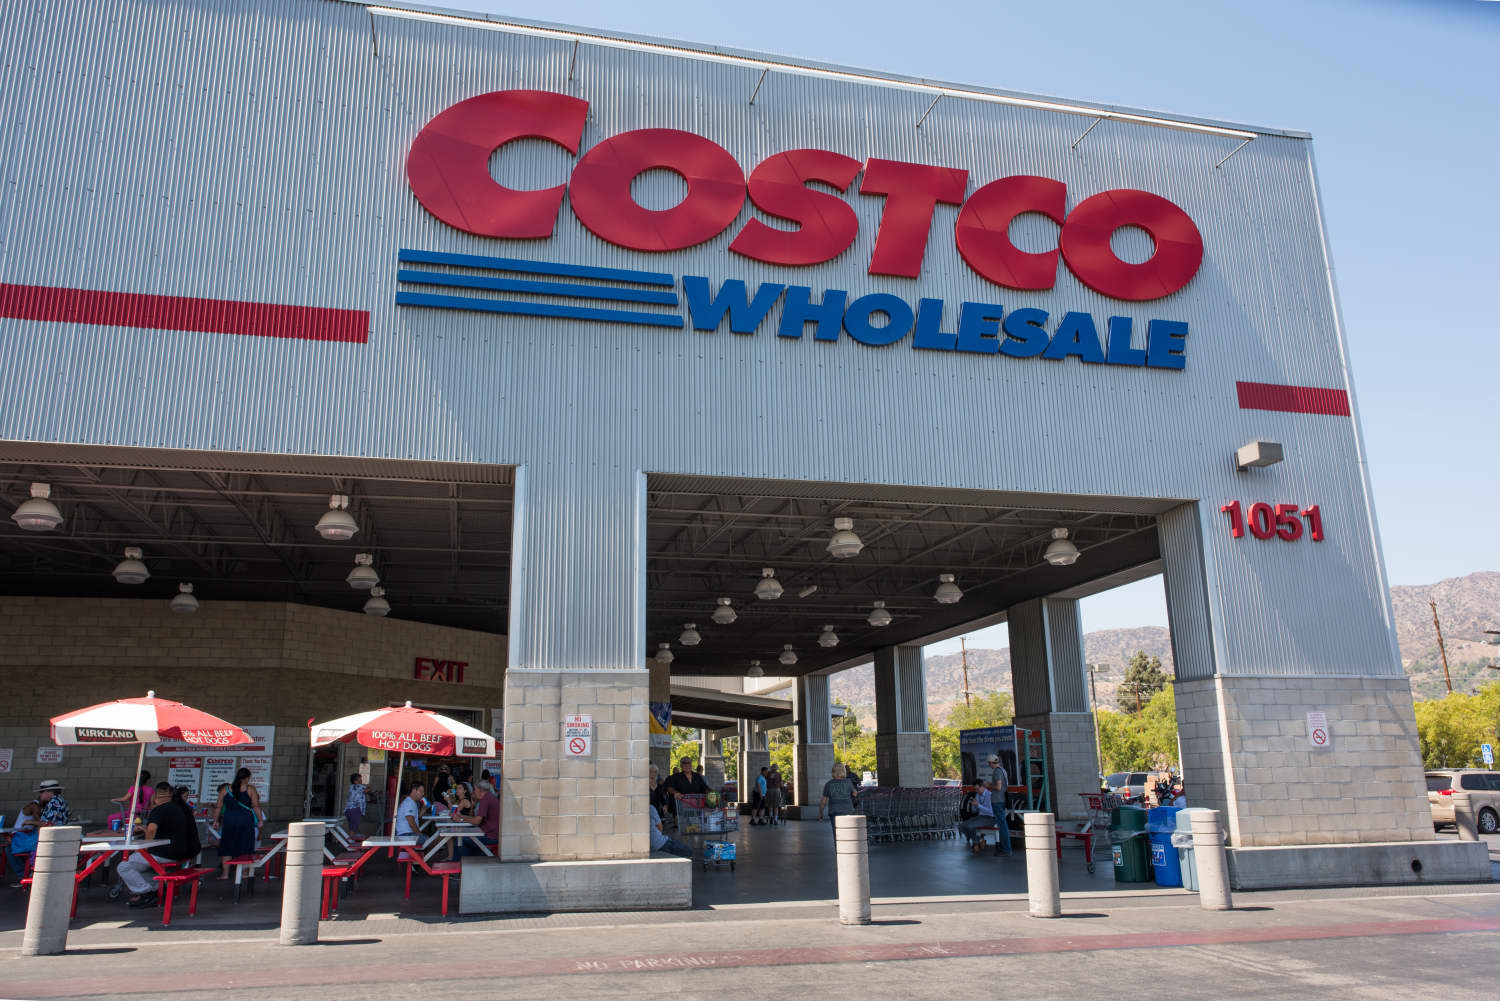 Costco’s 7-Drawer Freezer Is Back in Stock, So Grab It While You Can